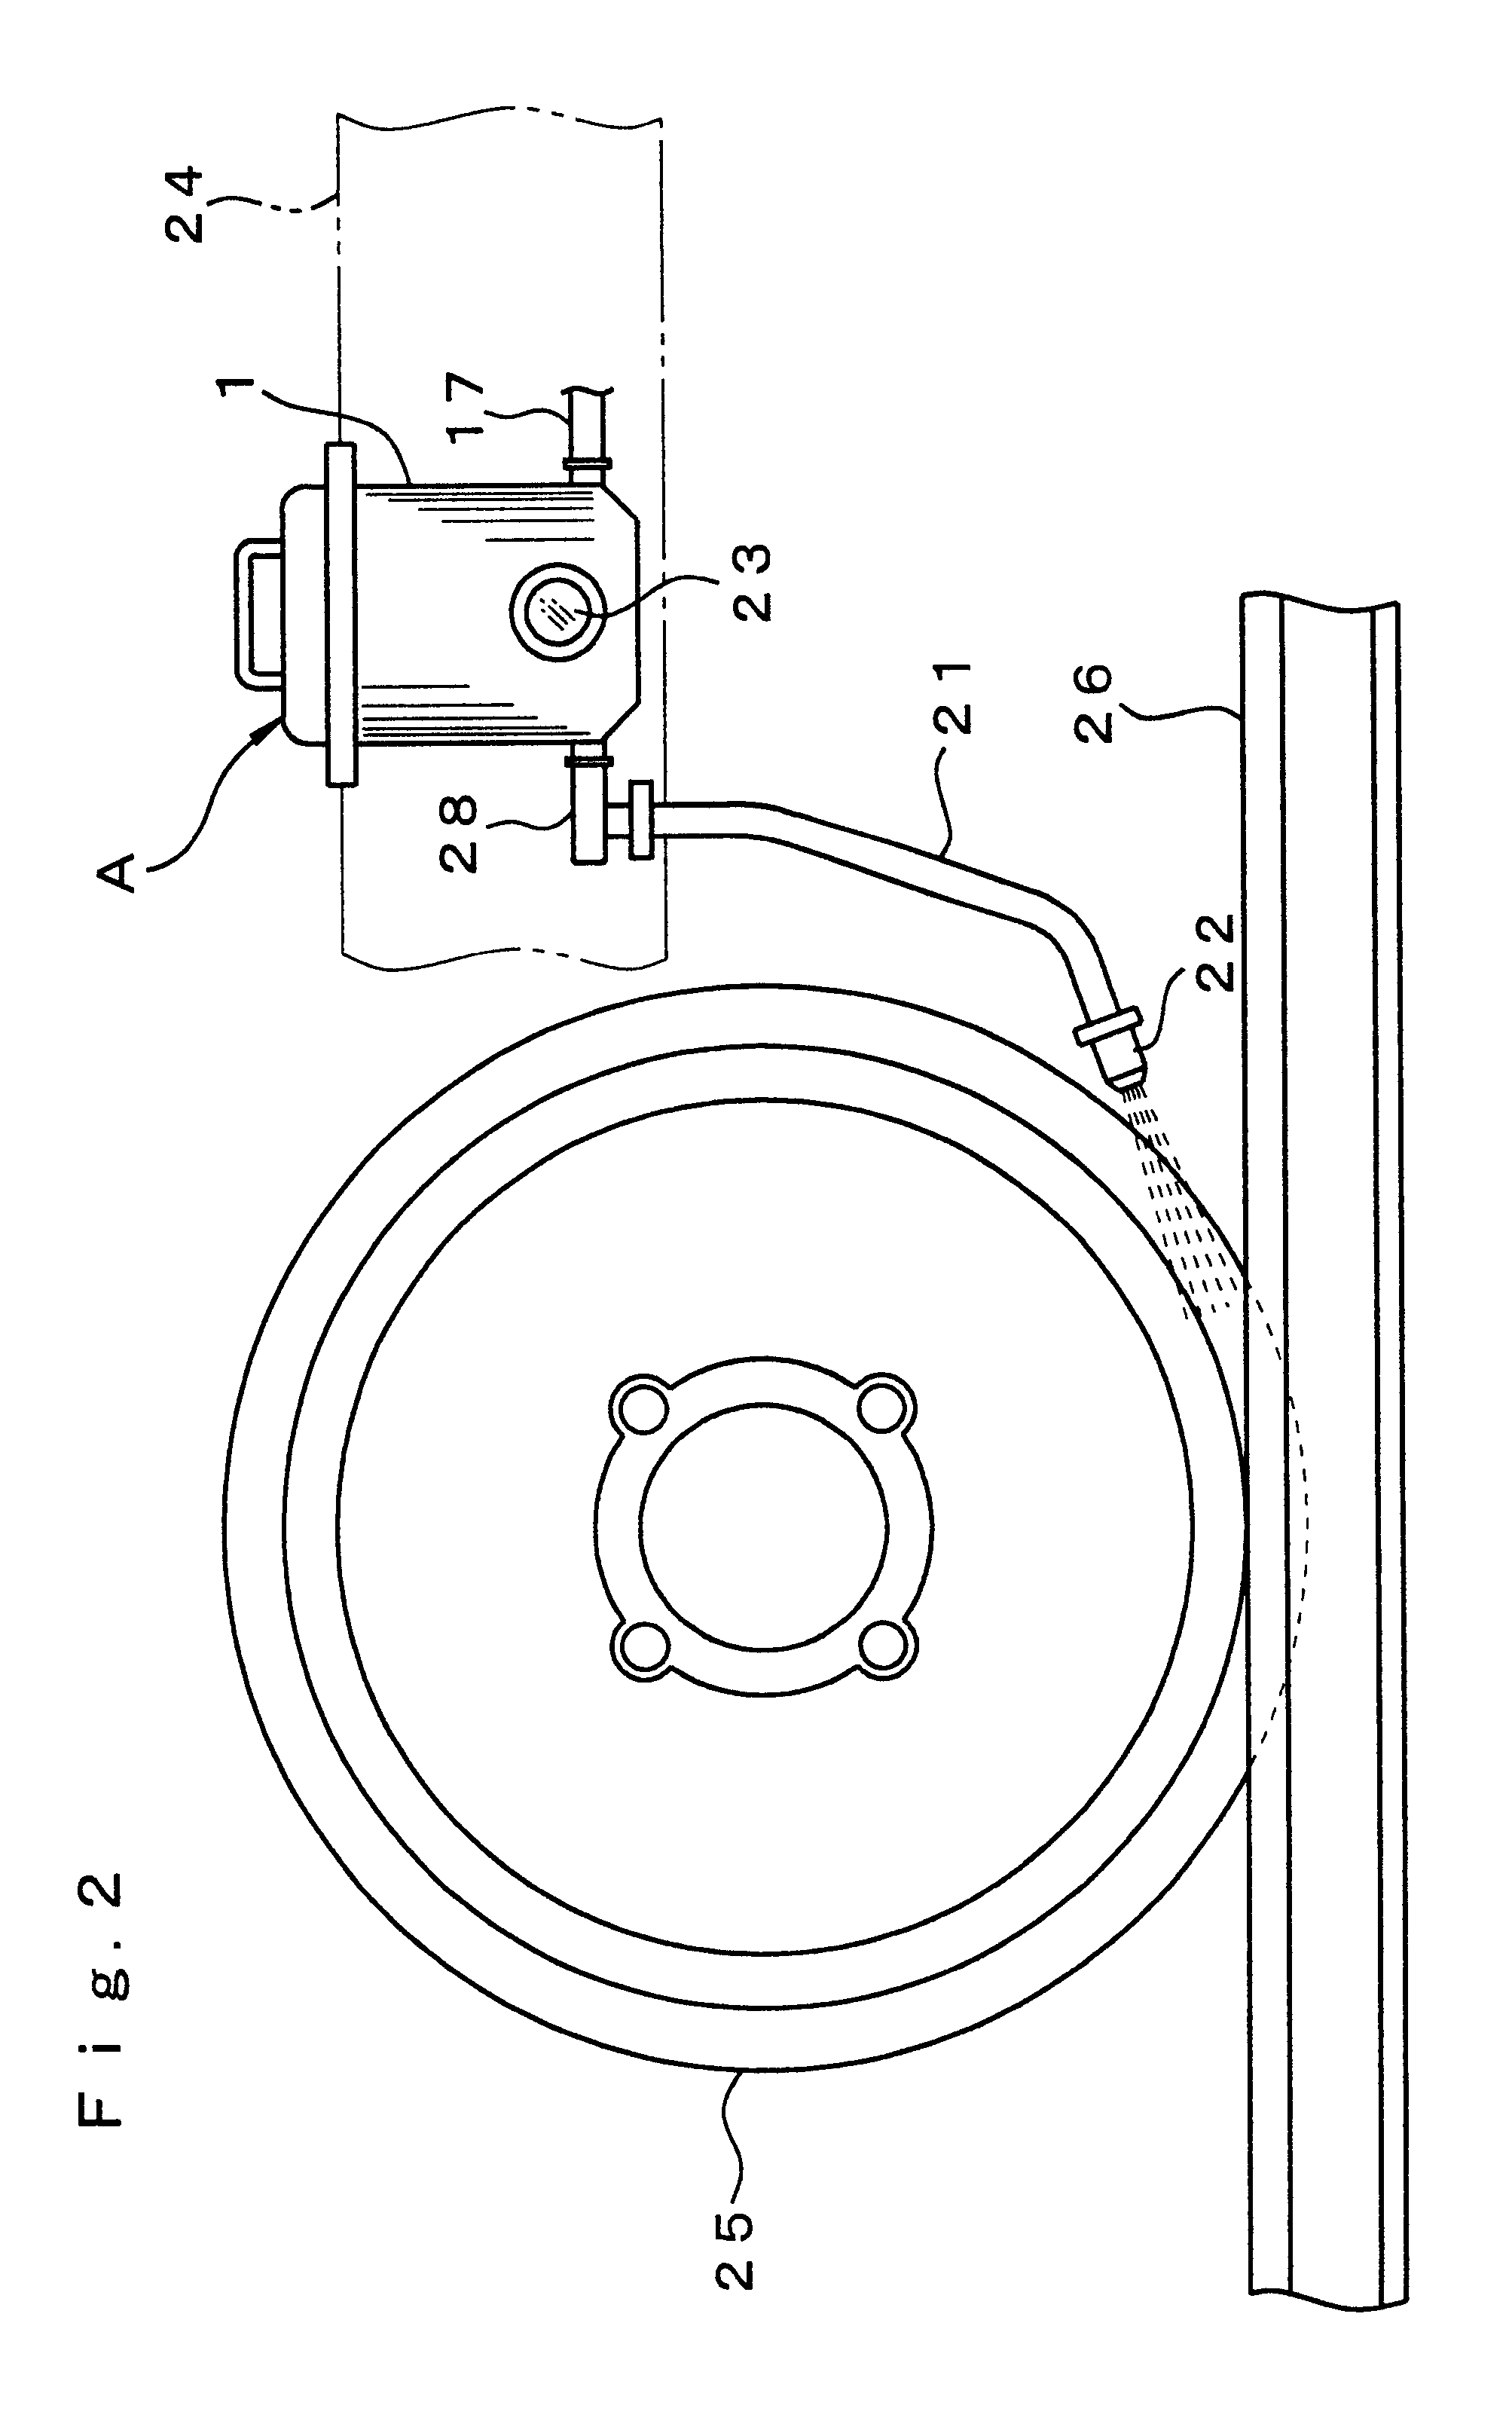 Slip prevention particle injection device